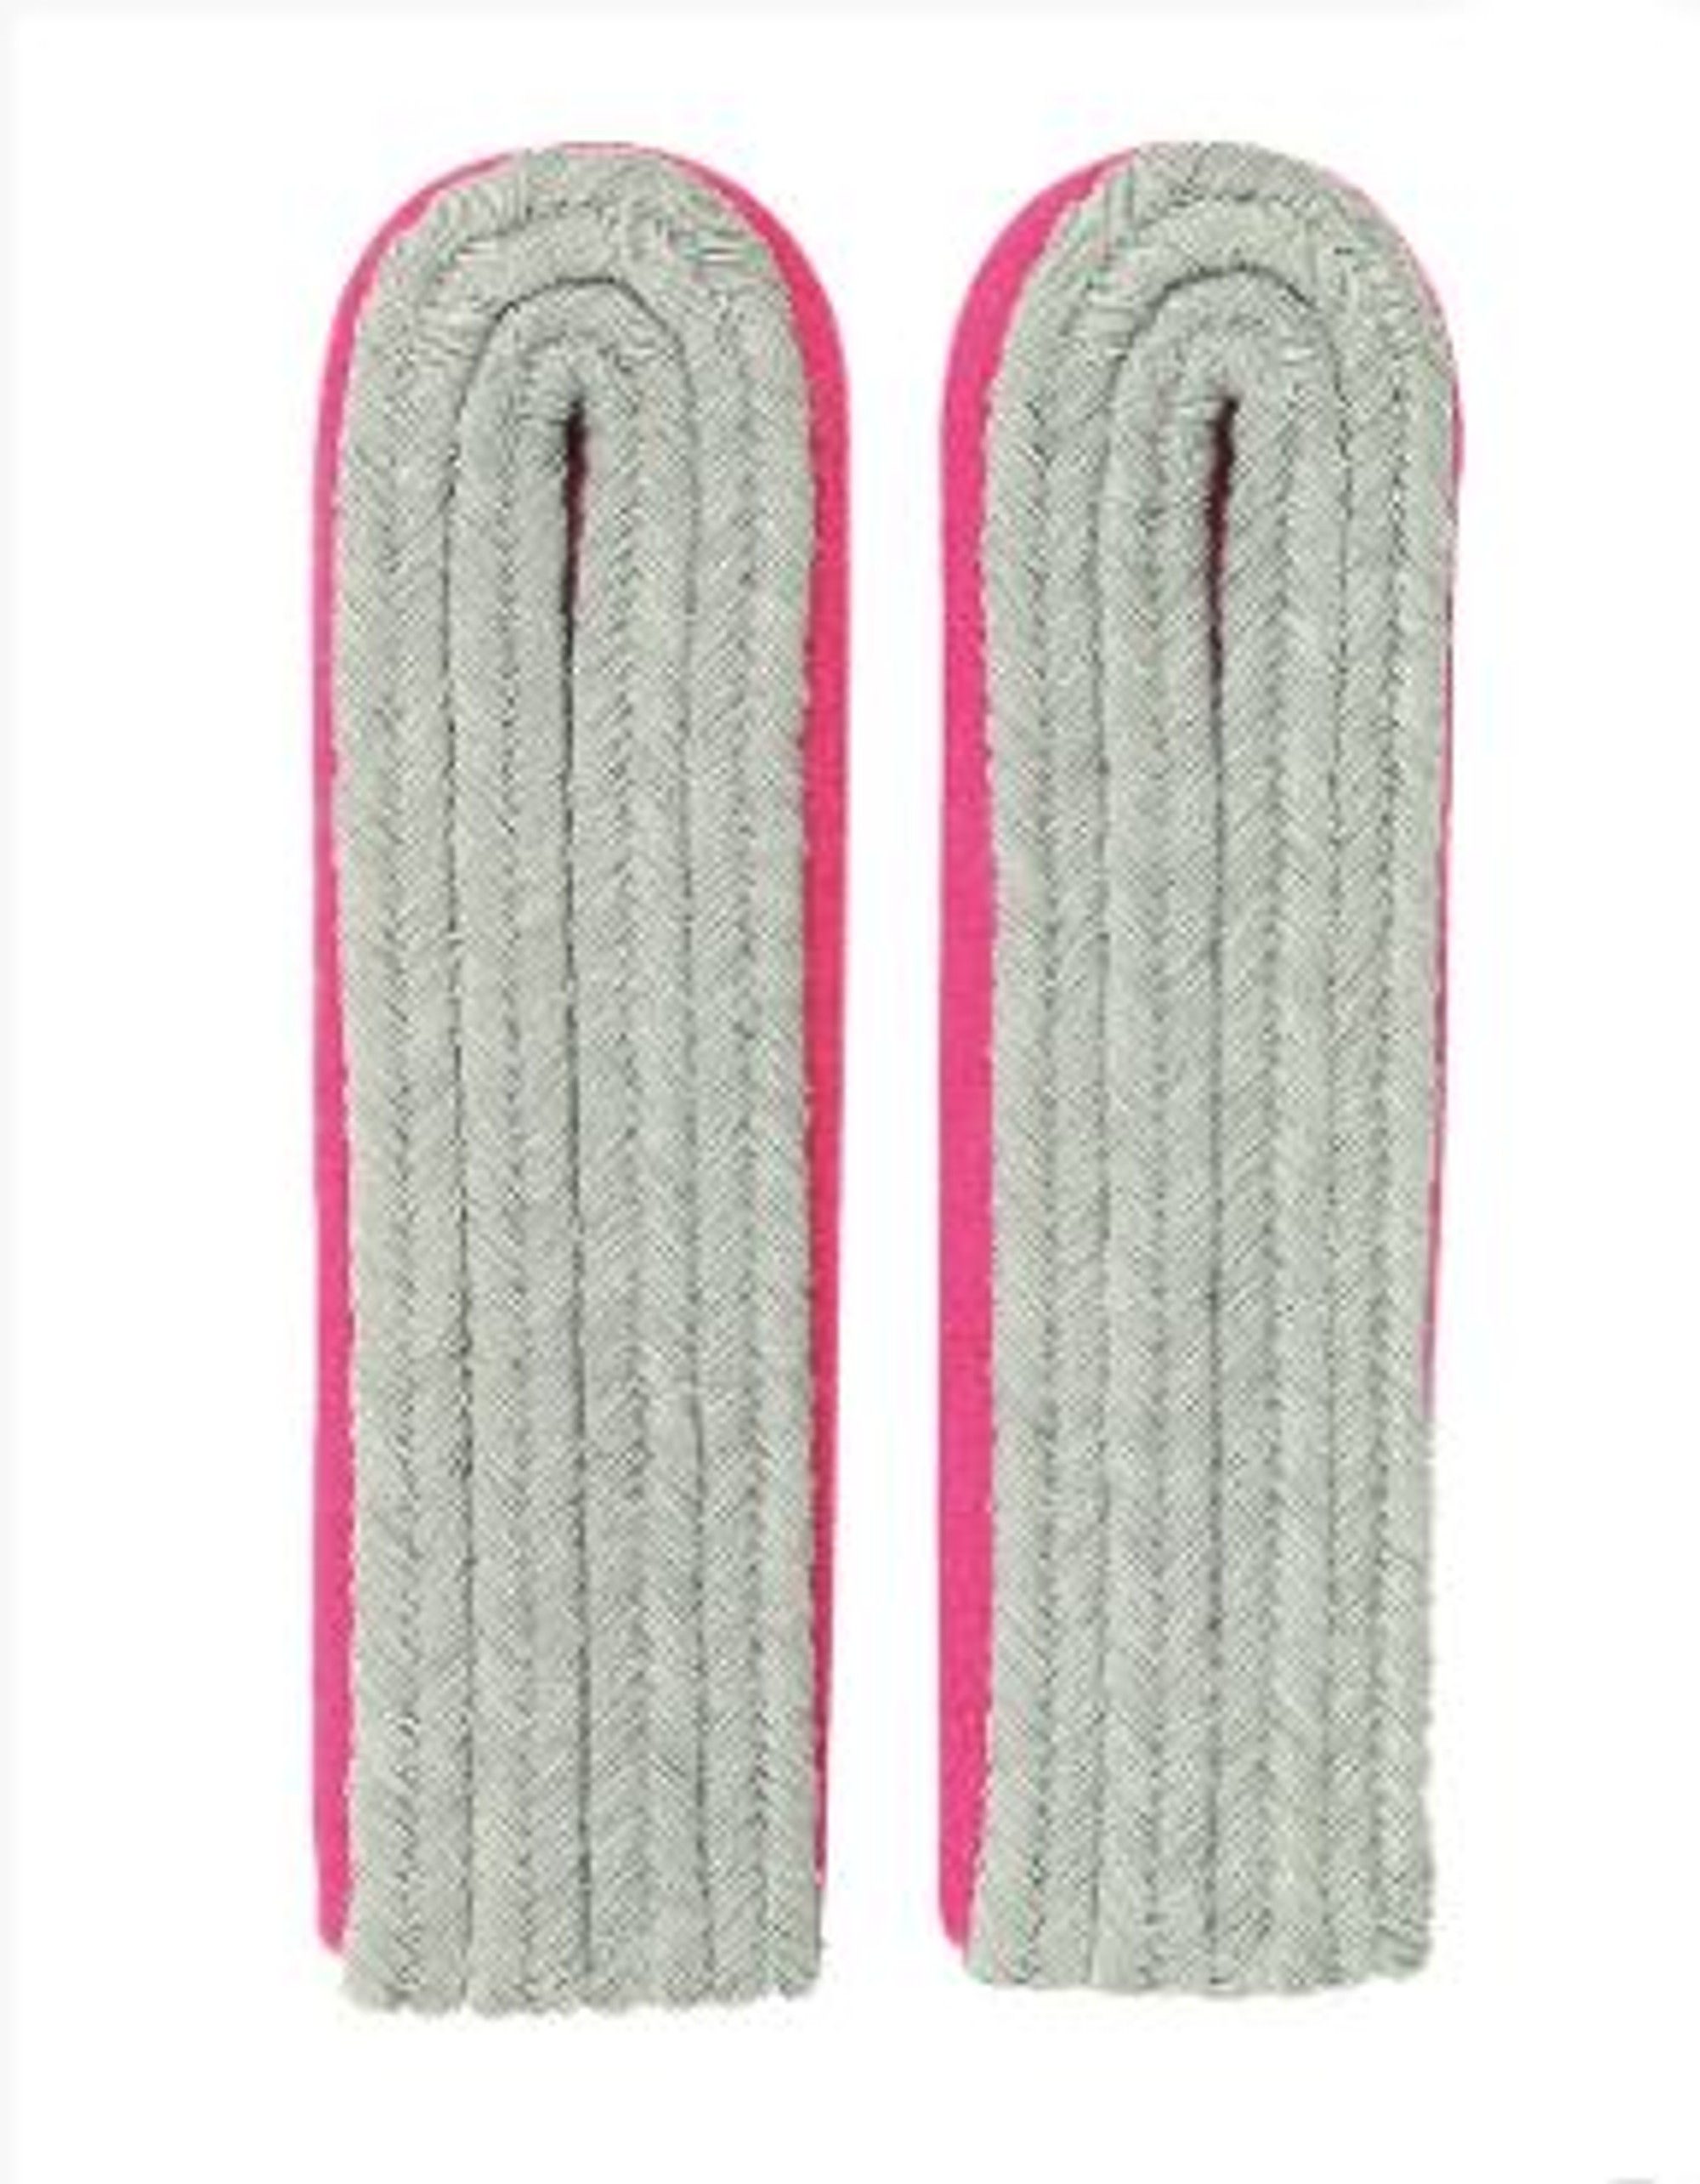 German Repro WWII Army Pink Panzer Lt. Shoulder Boards - Pair